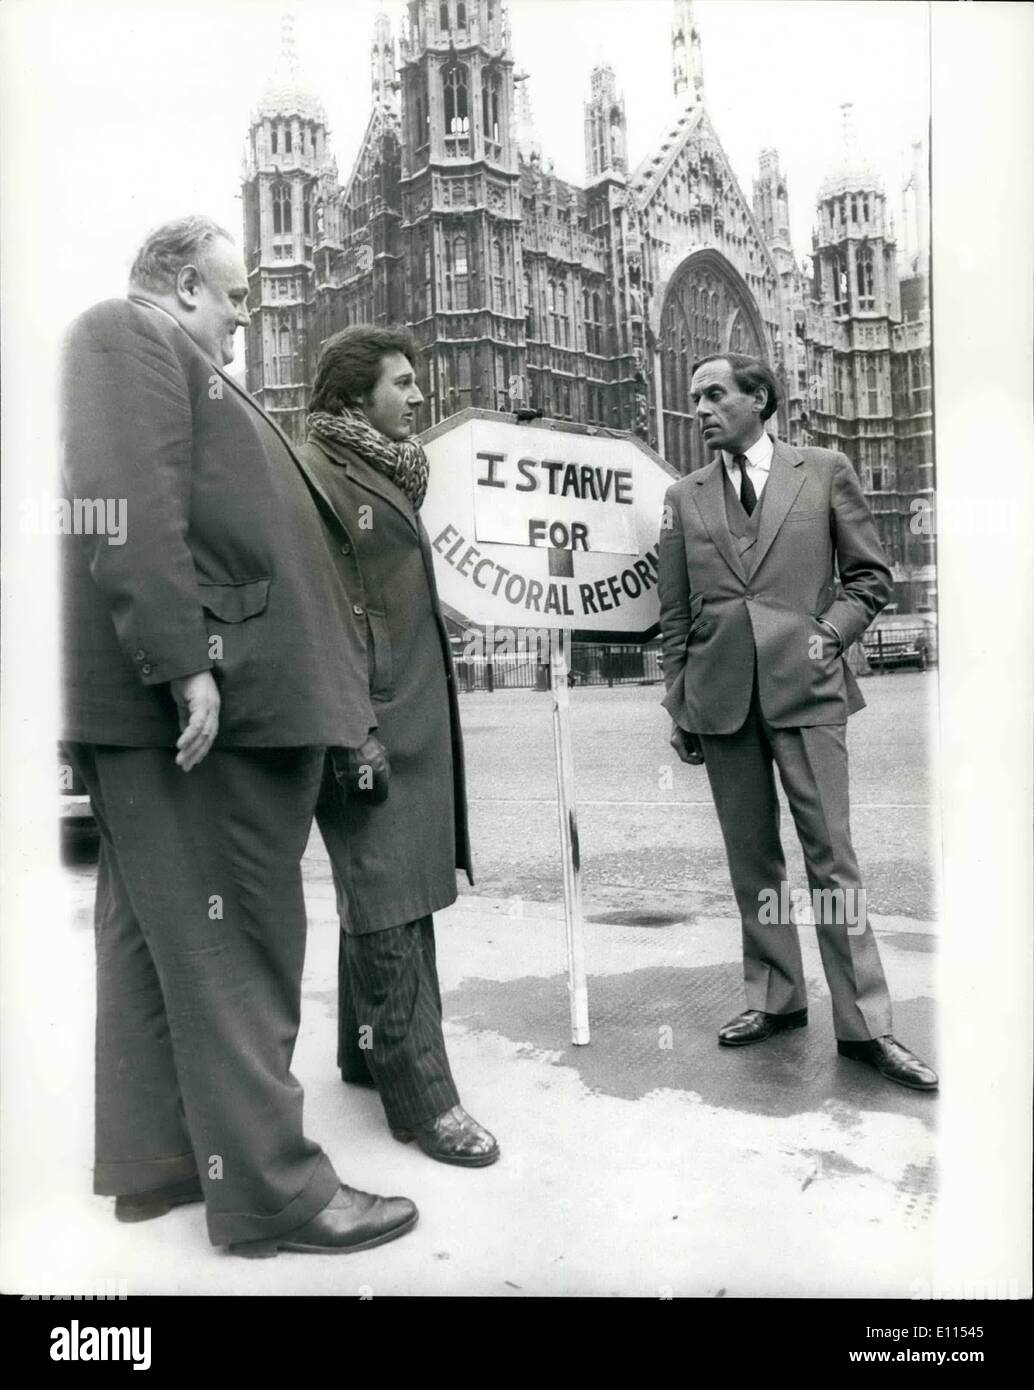 Dec. 12, 1975 - John Campbell The Hunger Striker Meet The Liberal Leader Mr. Jeremy Thorpe: Mr. John Campbell, Liberal candidate for Wigan in 1974 is continuing his hunger strike which he started last Monday, Although liberal Ms have done their best to dissolve him, he said that the intended to carry on which his fast until genuine concessions are offered by the Government to the Liberal demand from some from pf Proportional representation He declared his intention to carry on even should the point arrive at which the authorities intervene with forced feeding Stock Photo